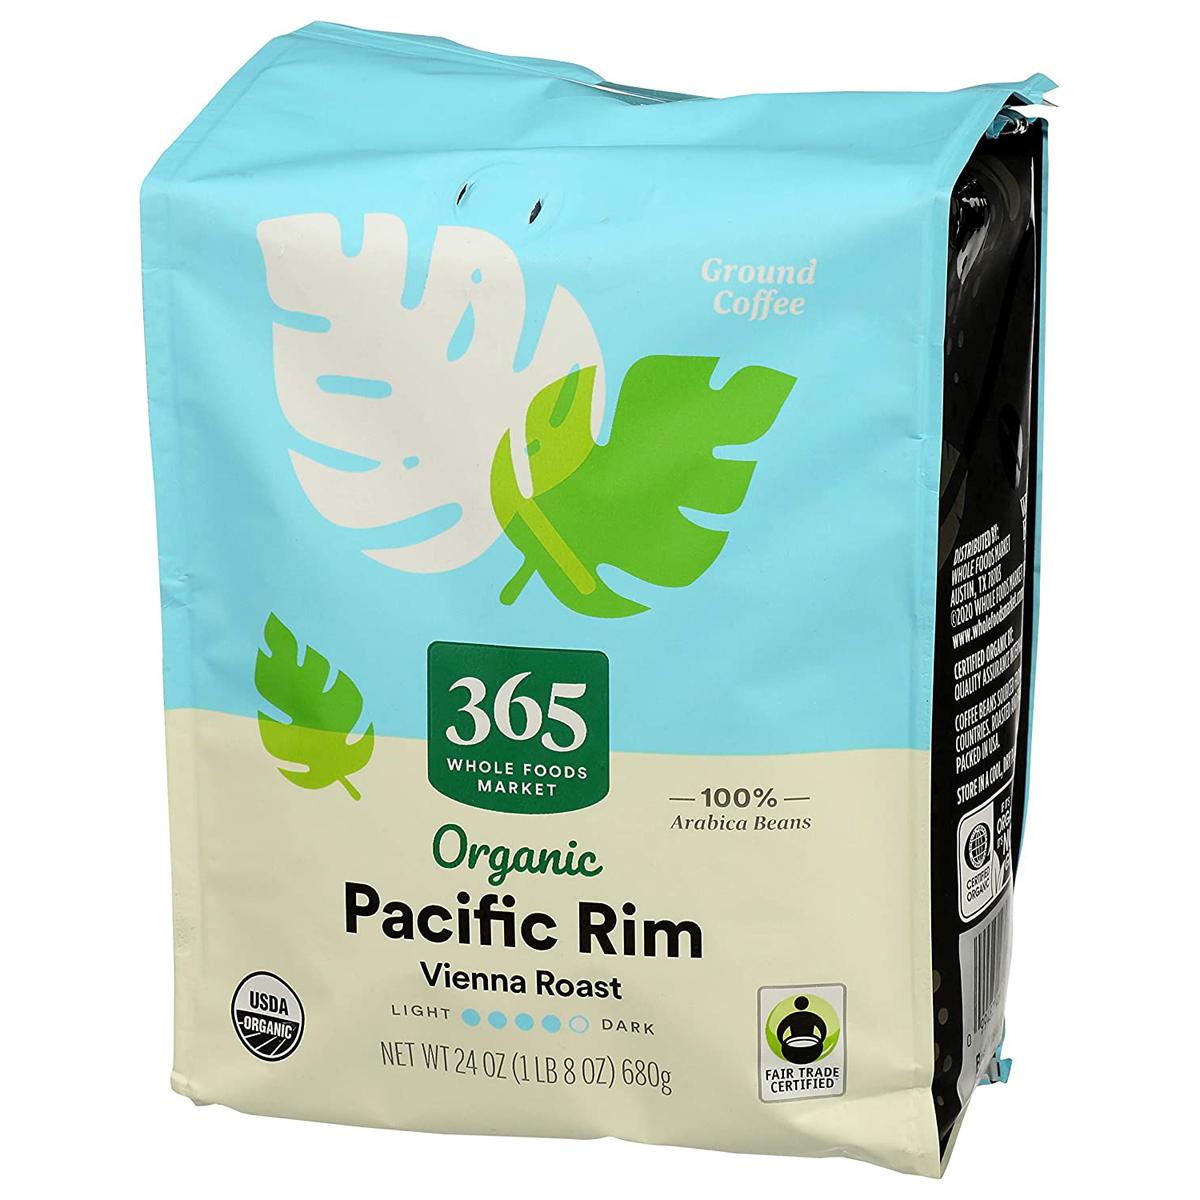 Pacific Rim Vienna Roast Ground Coffee for $6.42 Shipped